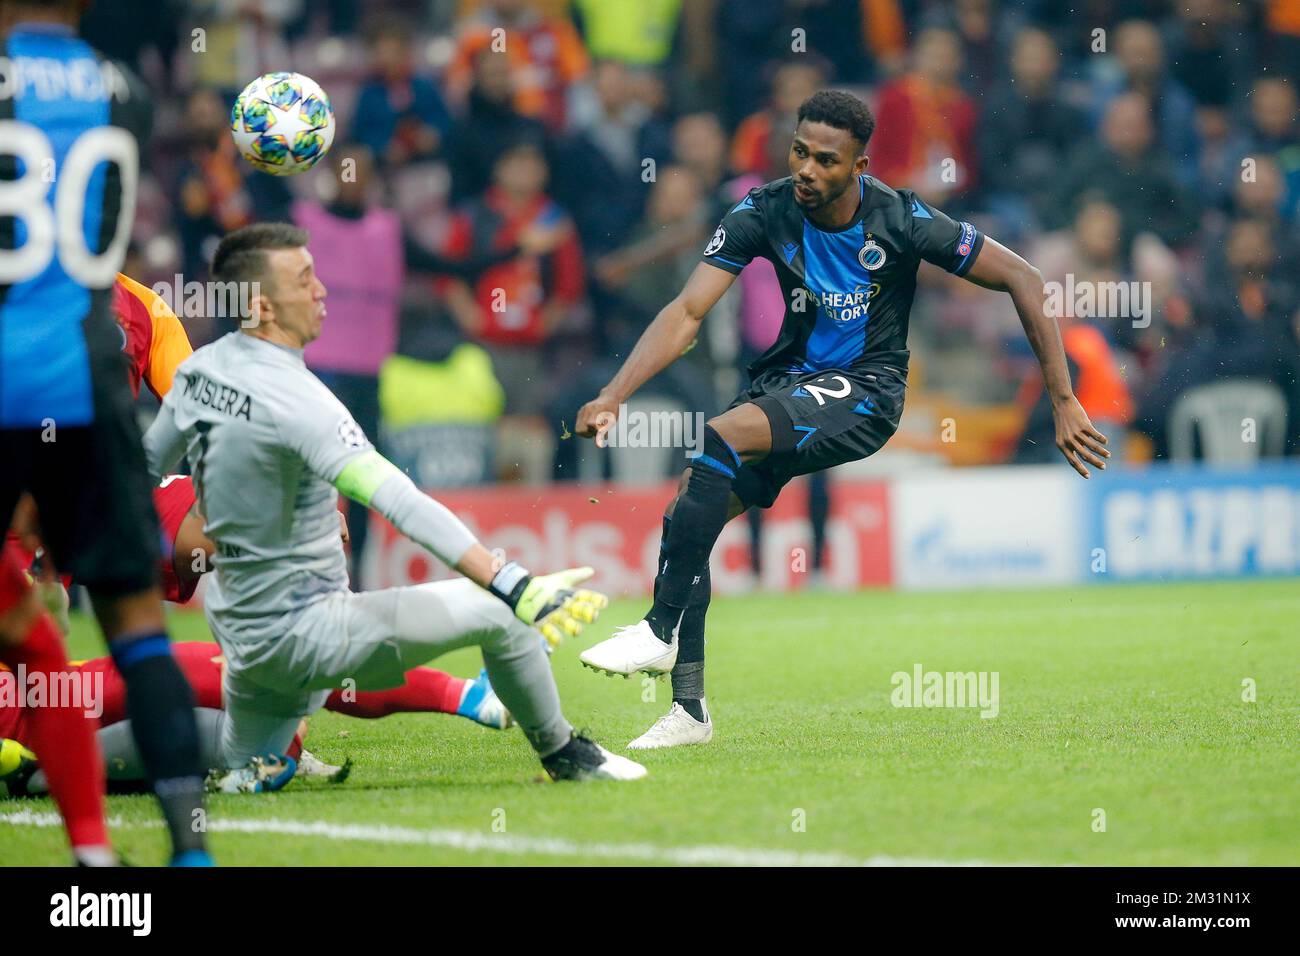 Galatasaray's Fernando Muslera and Club's Emmanuel Bonaventure Dennis fight for the ball during a game between Turkish club Galatasaray and Belgian soccer team Club Brugge, Tuesday 26 November 2019 in Istanbul, Turkey, fifth match in Group A of the UEFA Champions League. BELGA PHOTO BRUNO FAHY Stock Photo